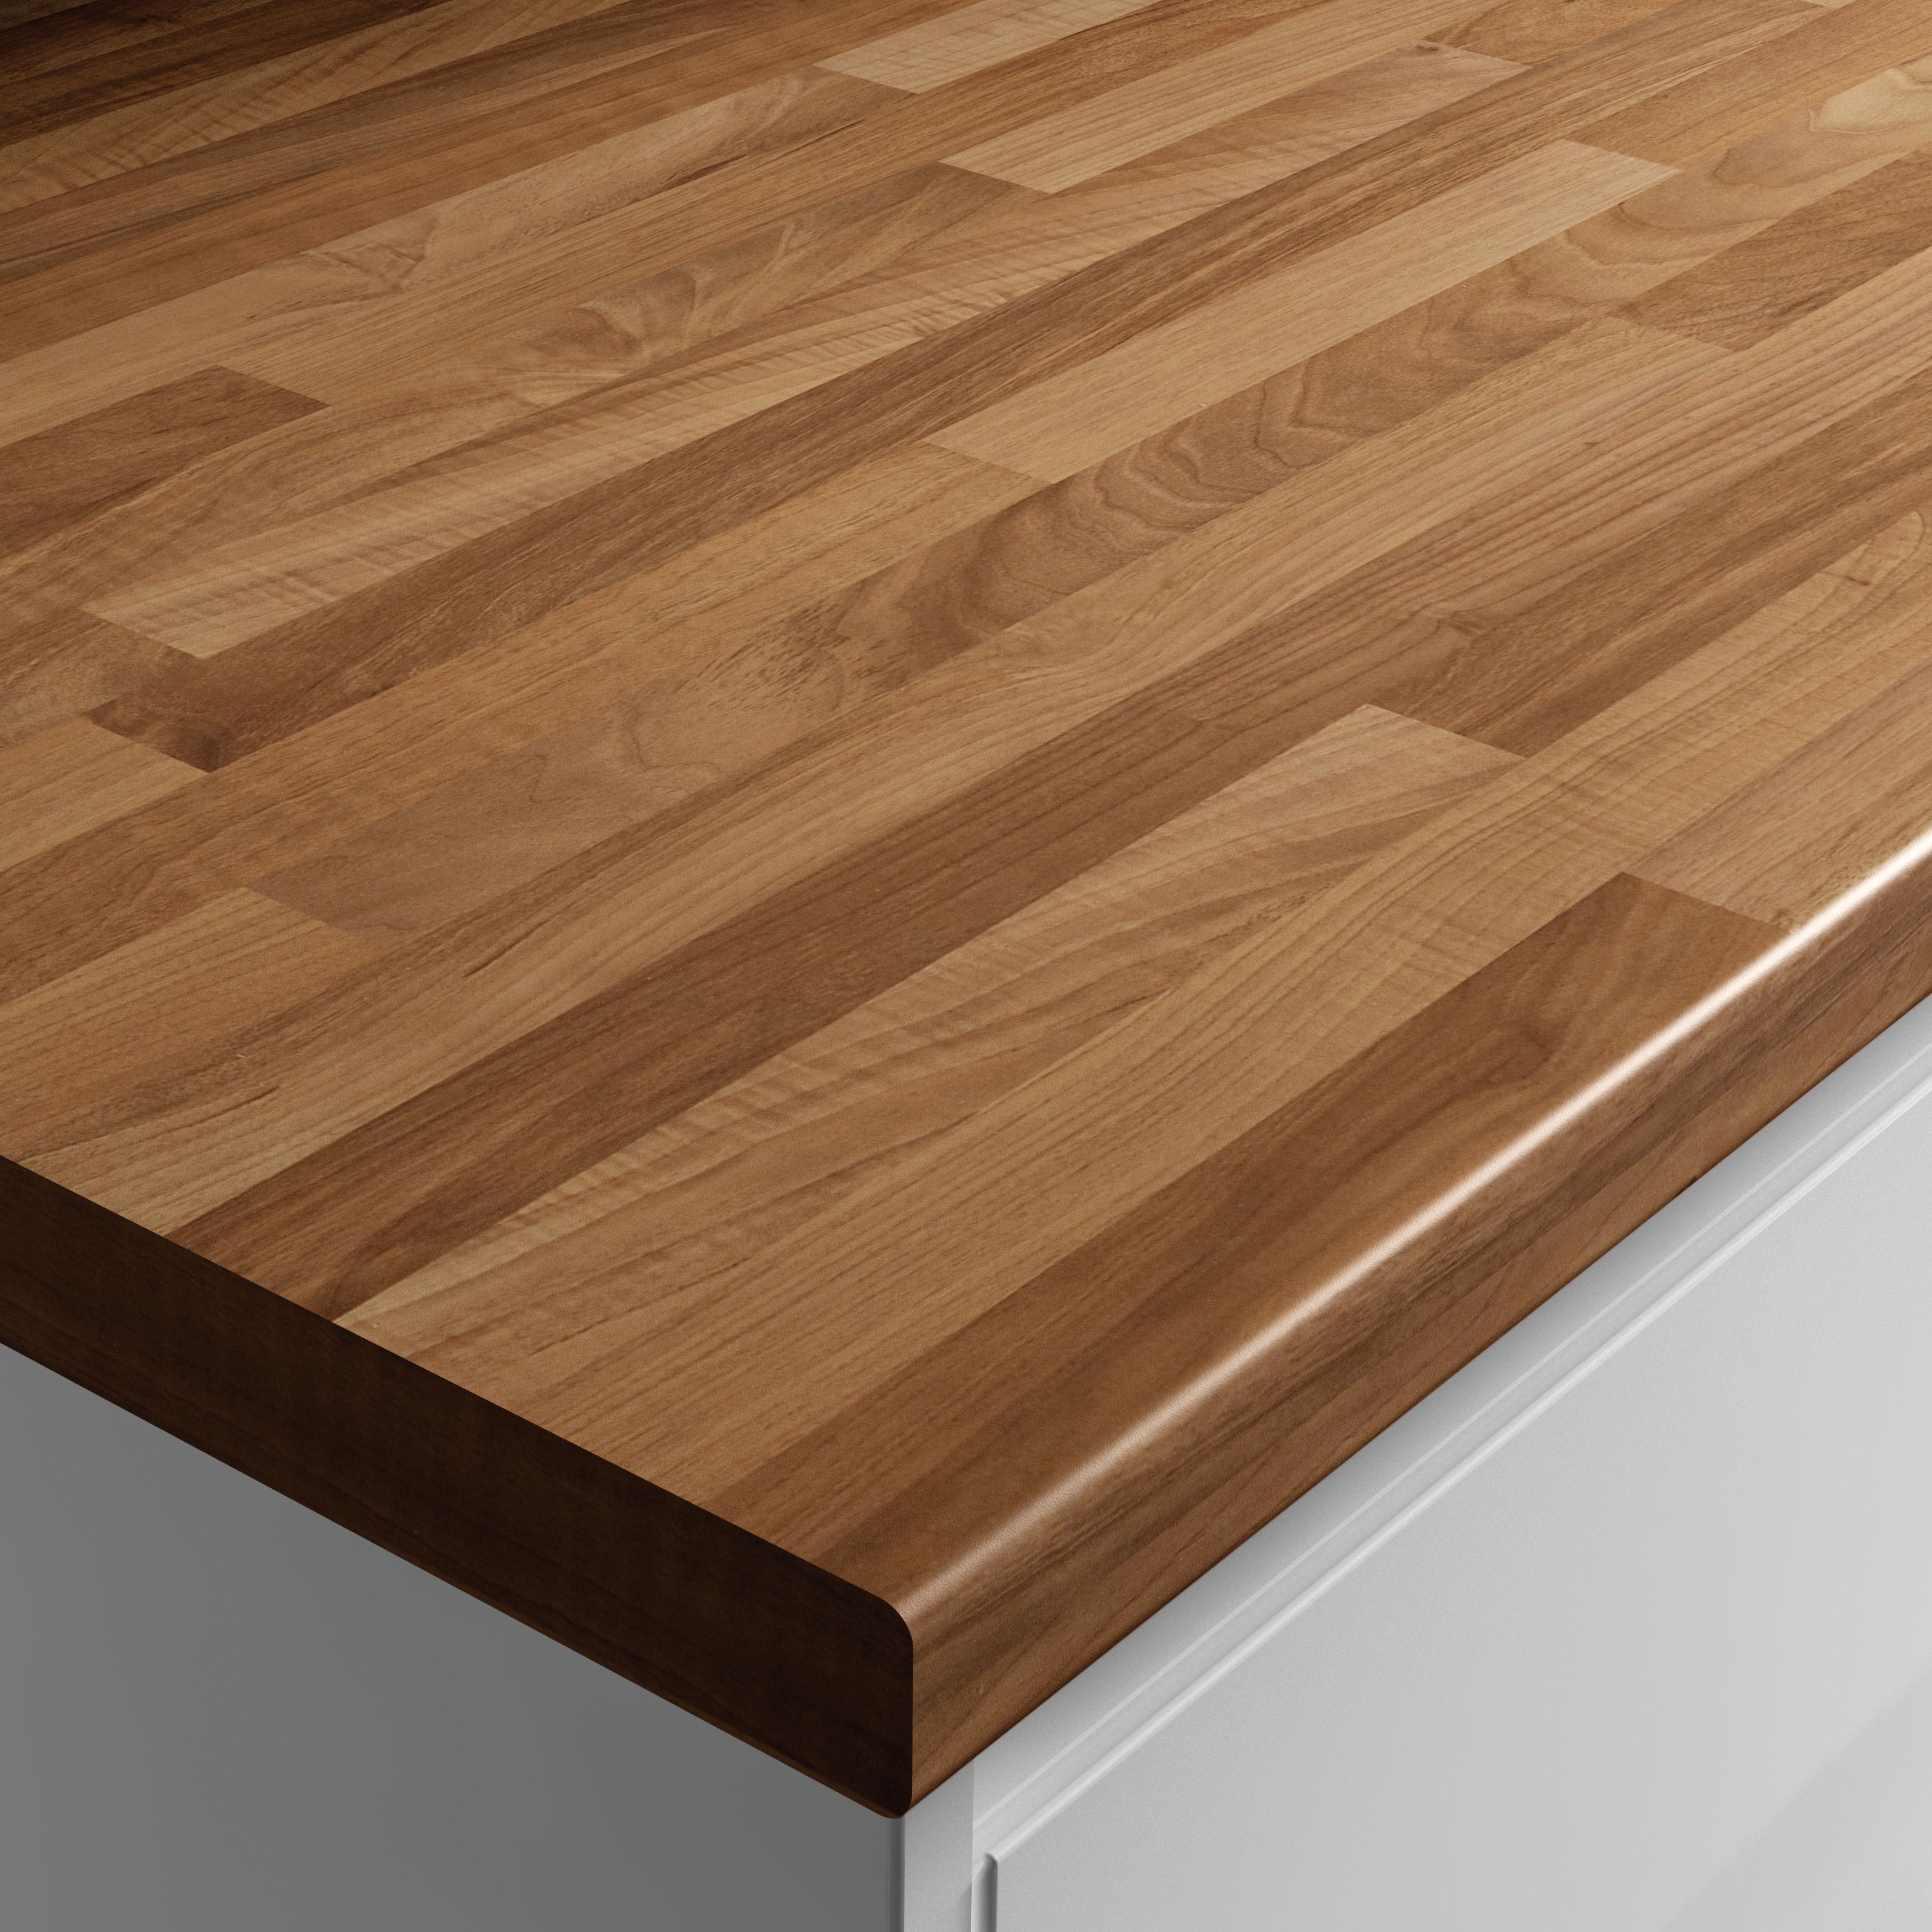 Image of Wickes Traditional Brown Blocked Oak Effect Laminate Worktop - 600x38mmx3m